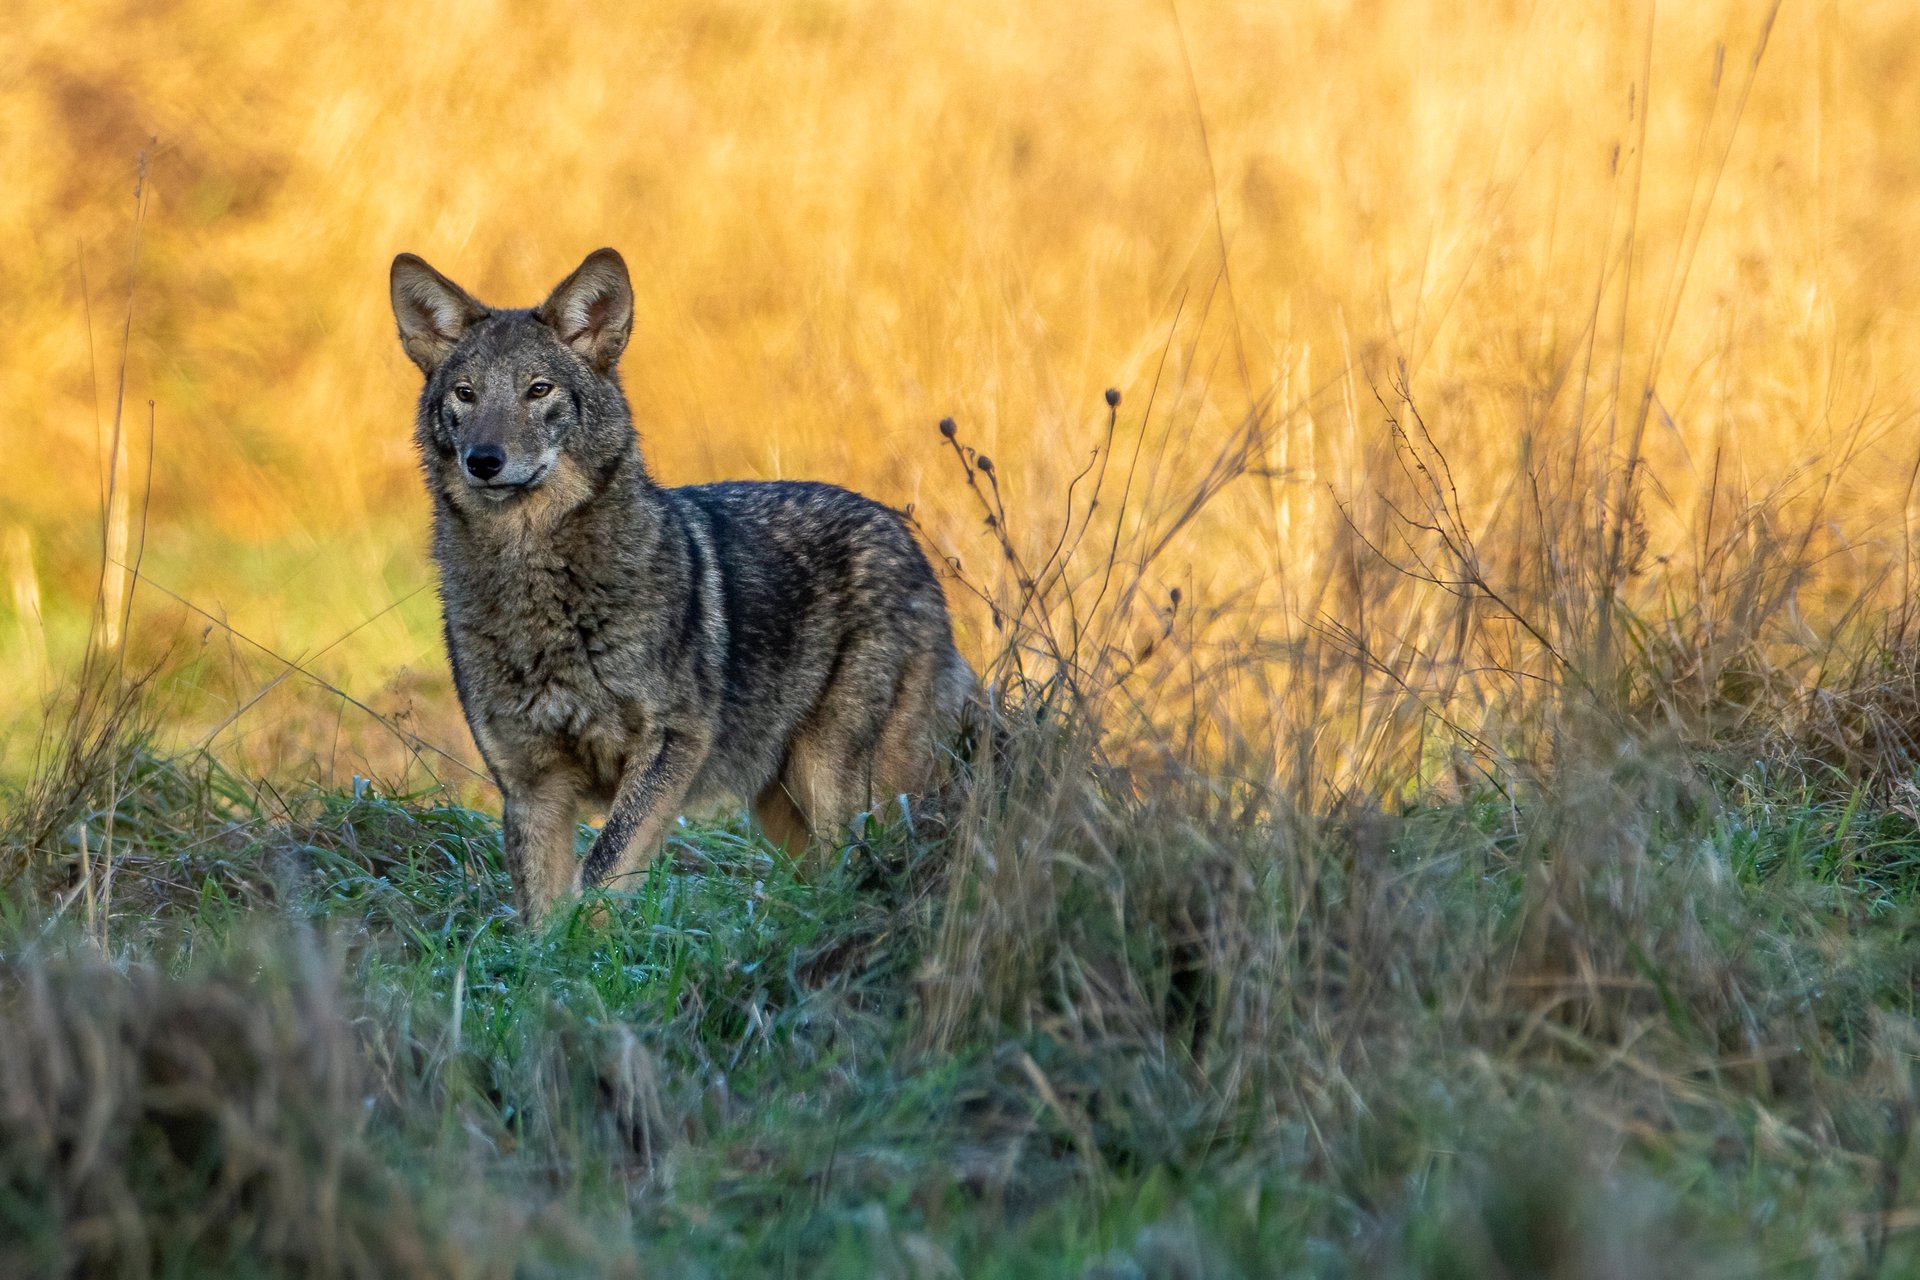 A coyote standing in tall brown and green grass.